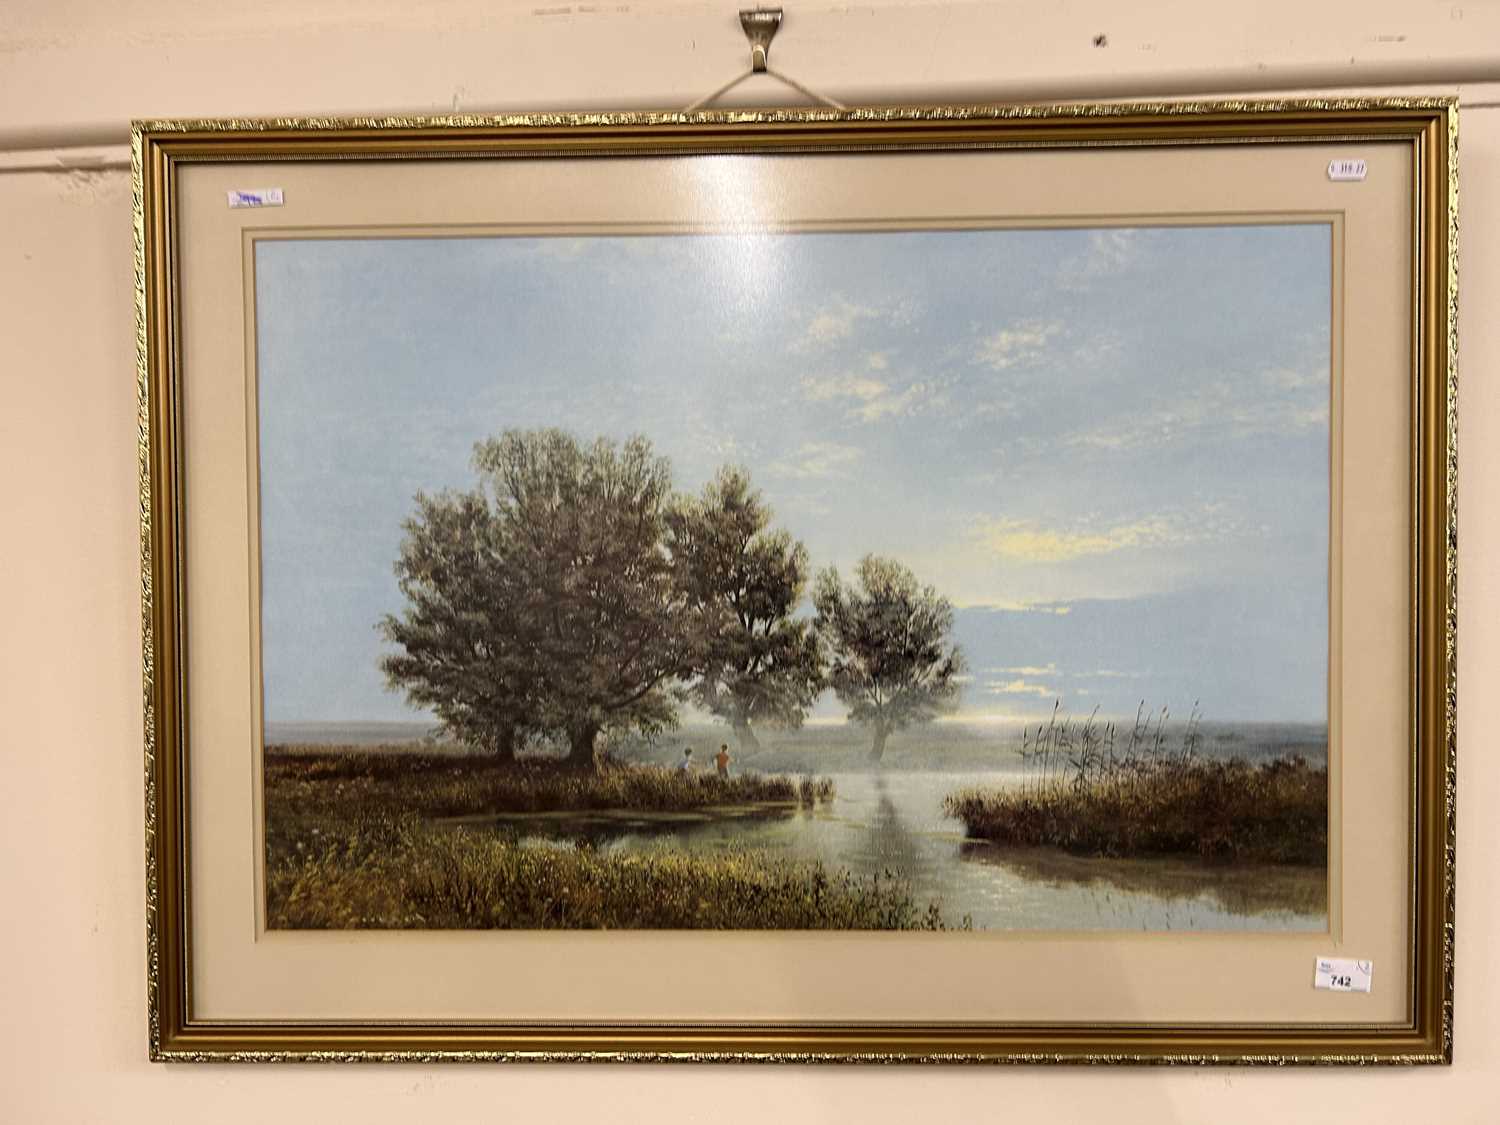 A reproduction colour print of a landscape by David Shepherd, framed and glazed together with